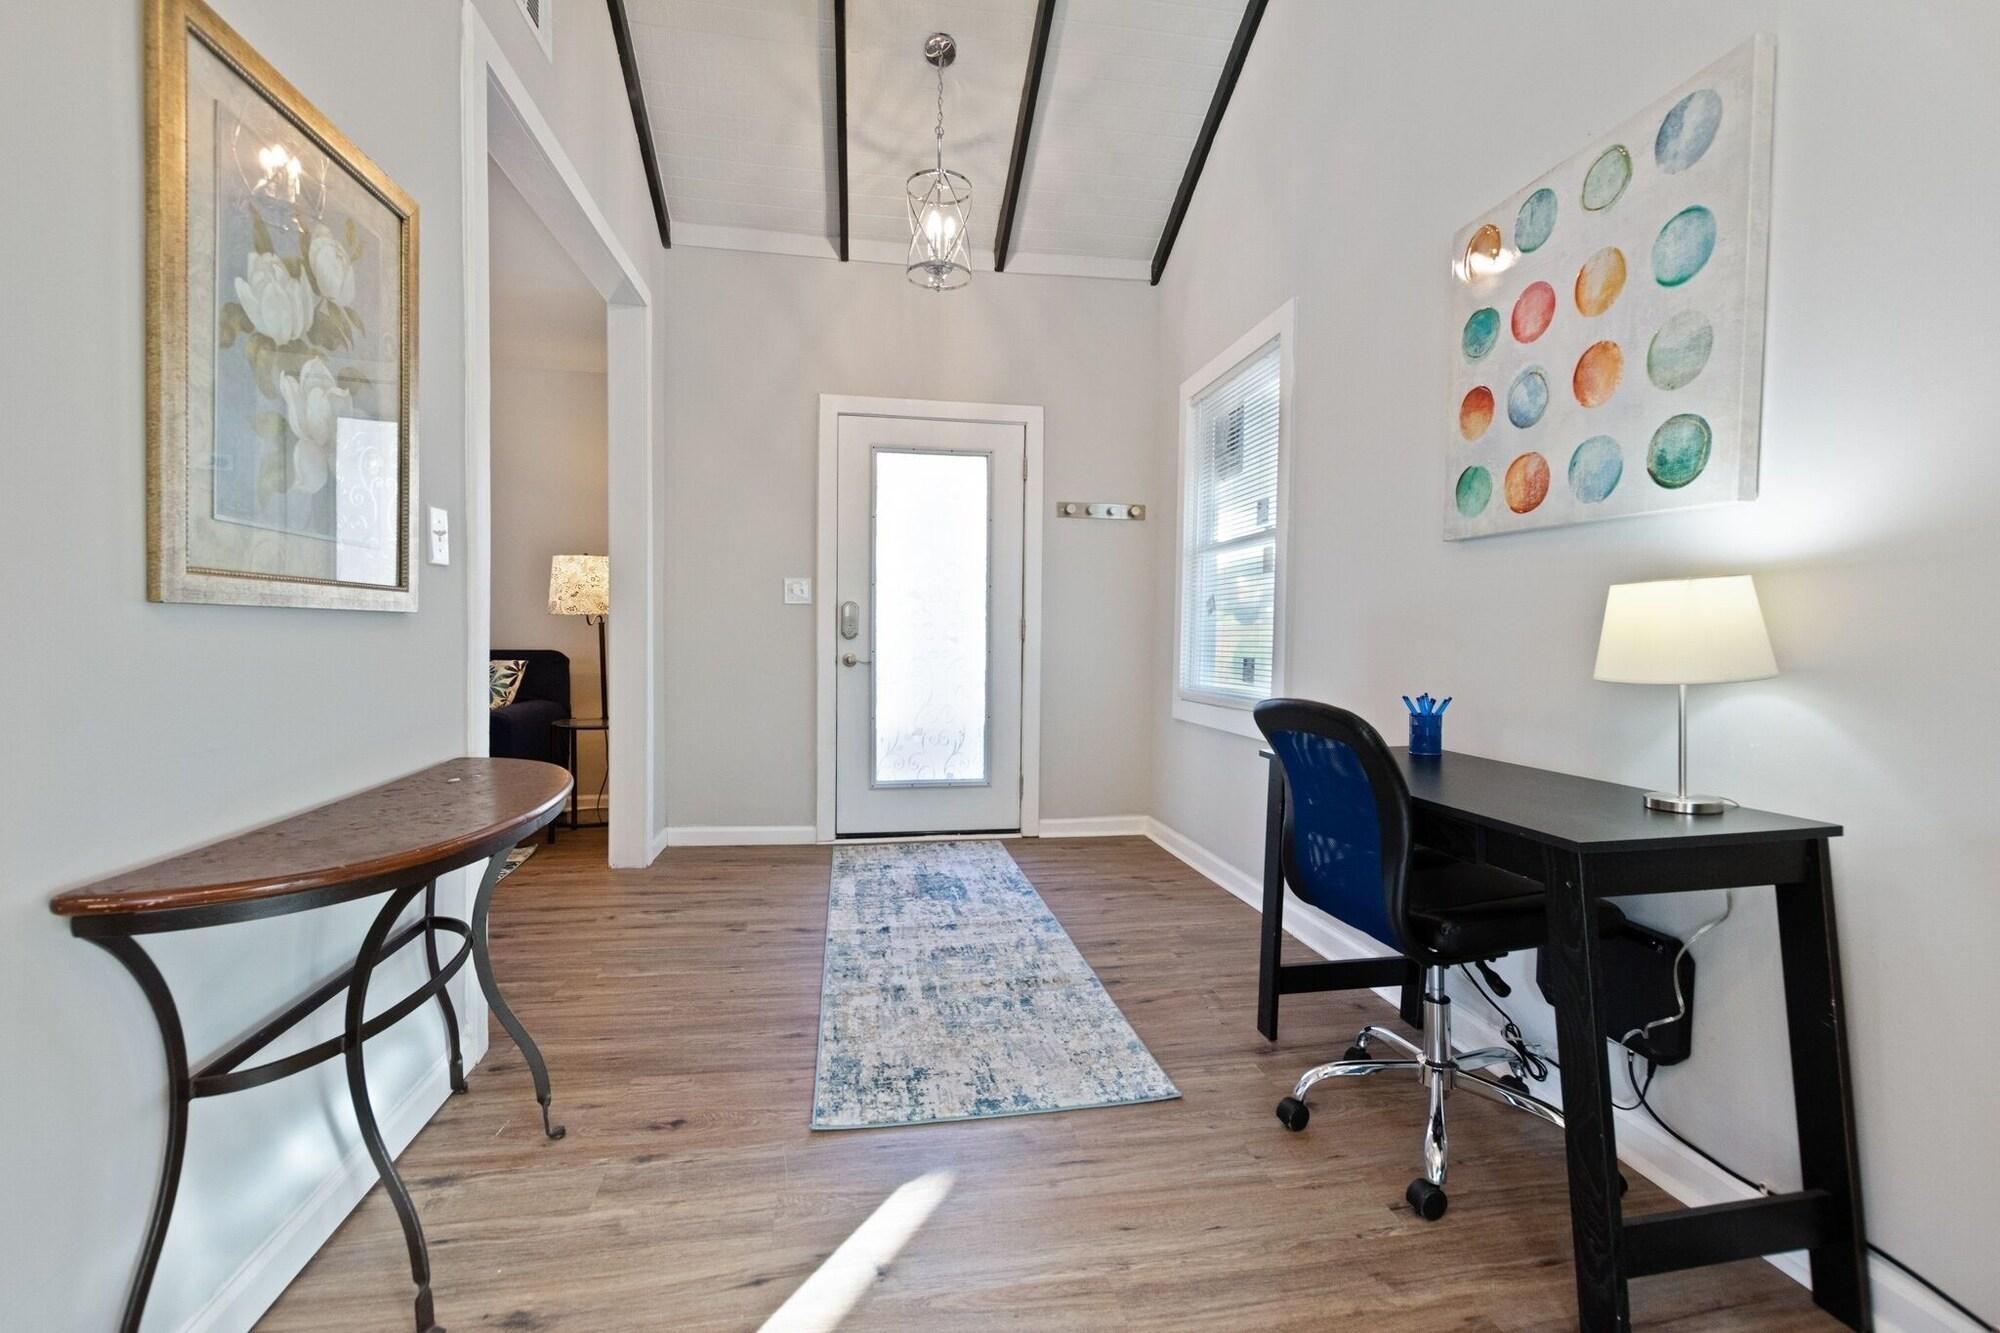 Guest room Explore Atlanta! Enjoy All The City Has To Offer Without The Noise And Stress Of City Life! 2 Bedroom Home by Redawning